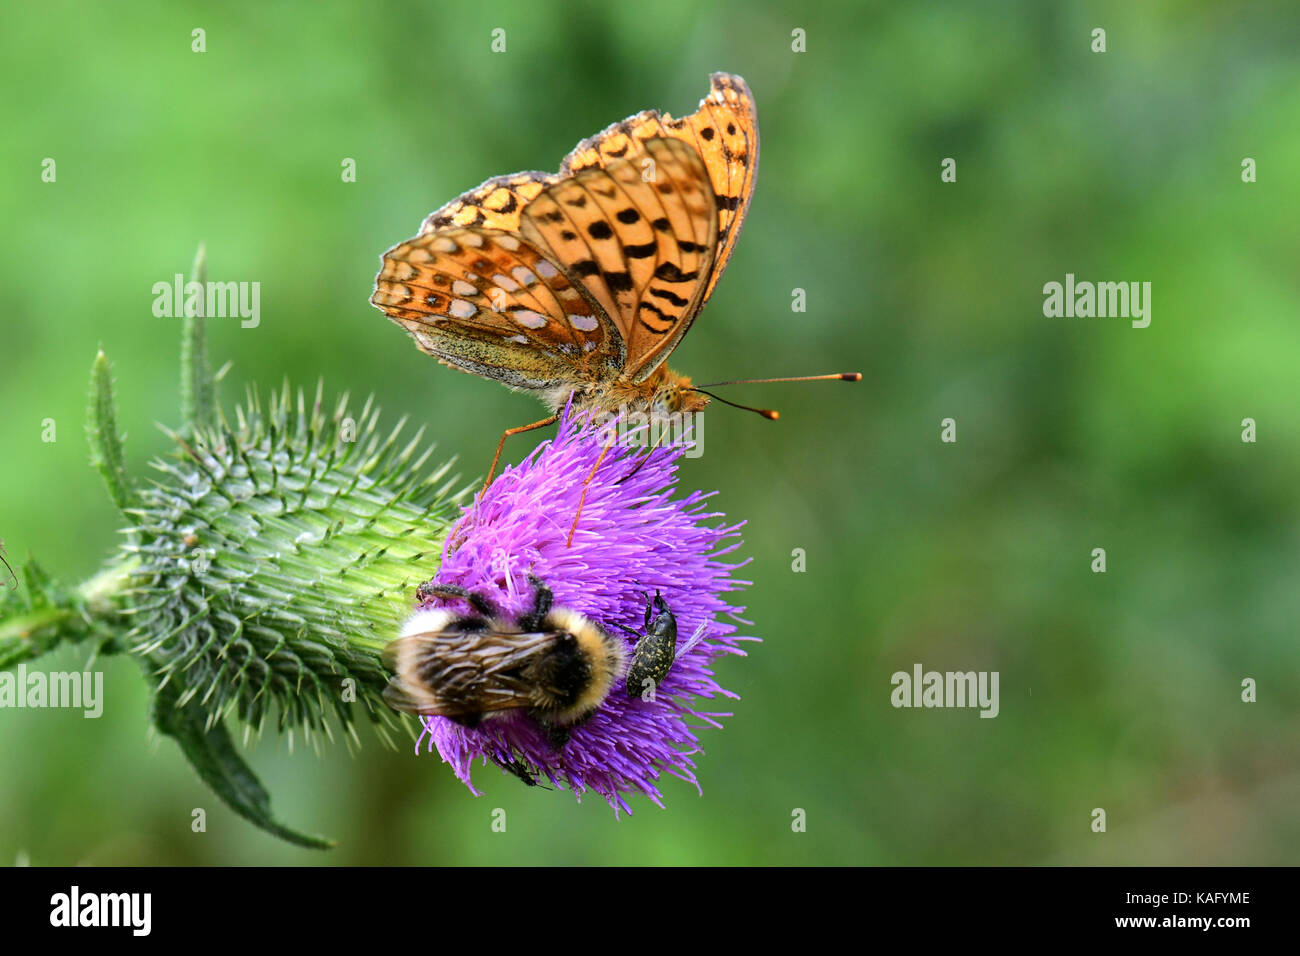 Queen od Spain fritillary (Issoria lathonia, Argynnis lathonia) drinking nectar at a thistle flower together with a bumble bee Stock Photo